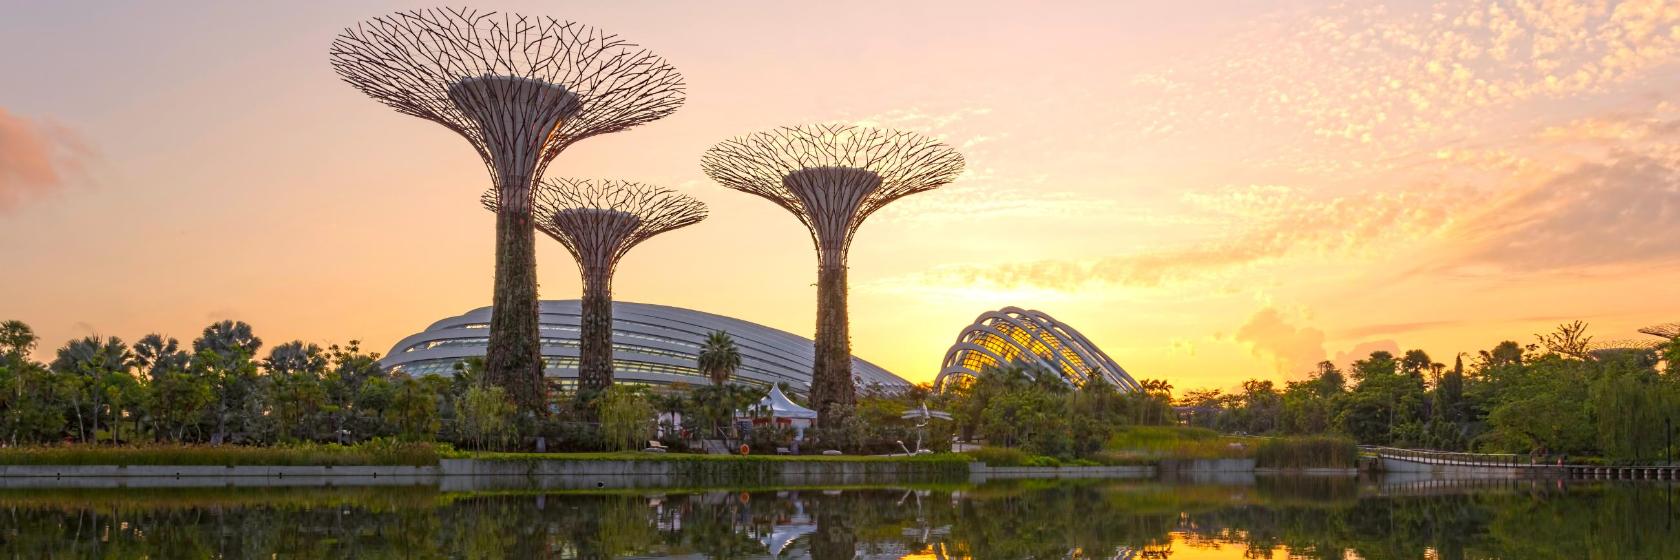 The 10 Best Hotels Near Gardens By The Bay In Singapore Singapore